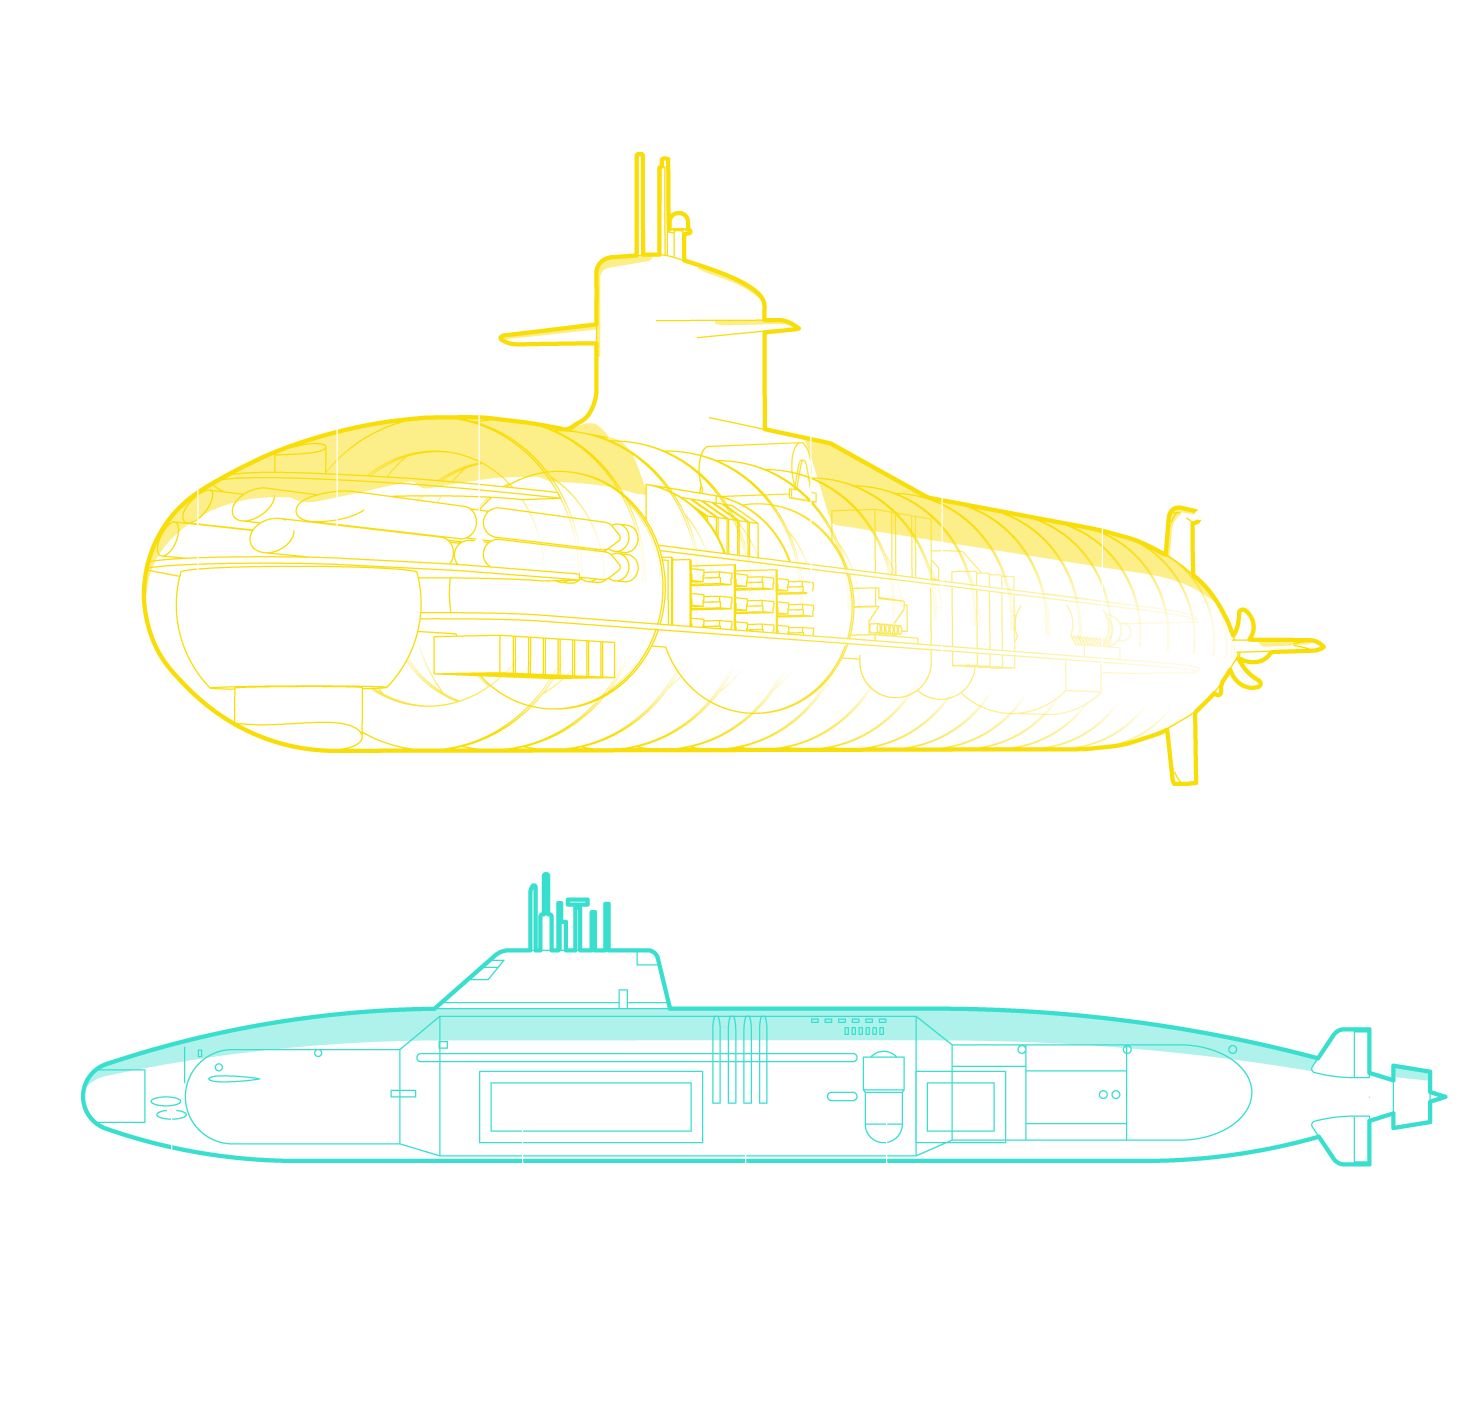 Illustration of China's new Type 093 nuclear-powered submarine and the planned AUKUS attack submarine